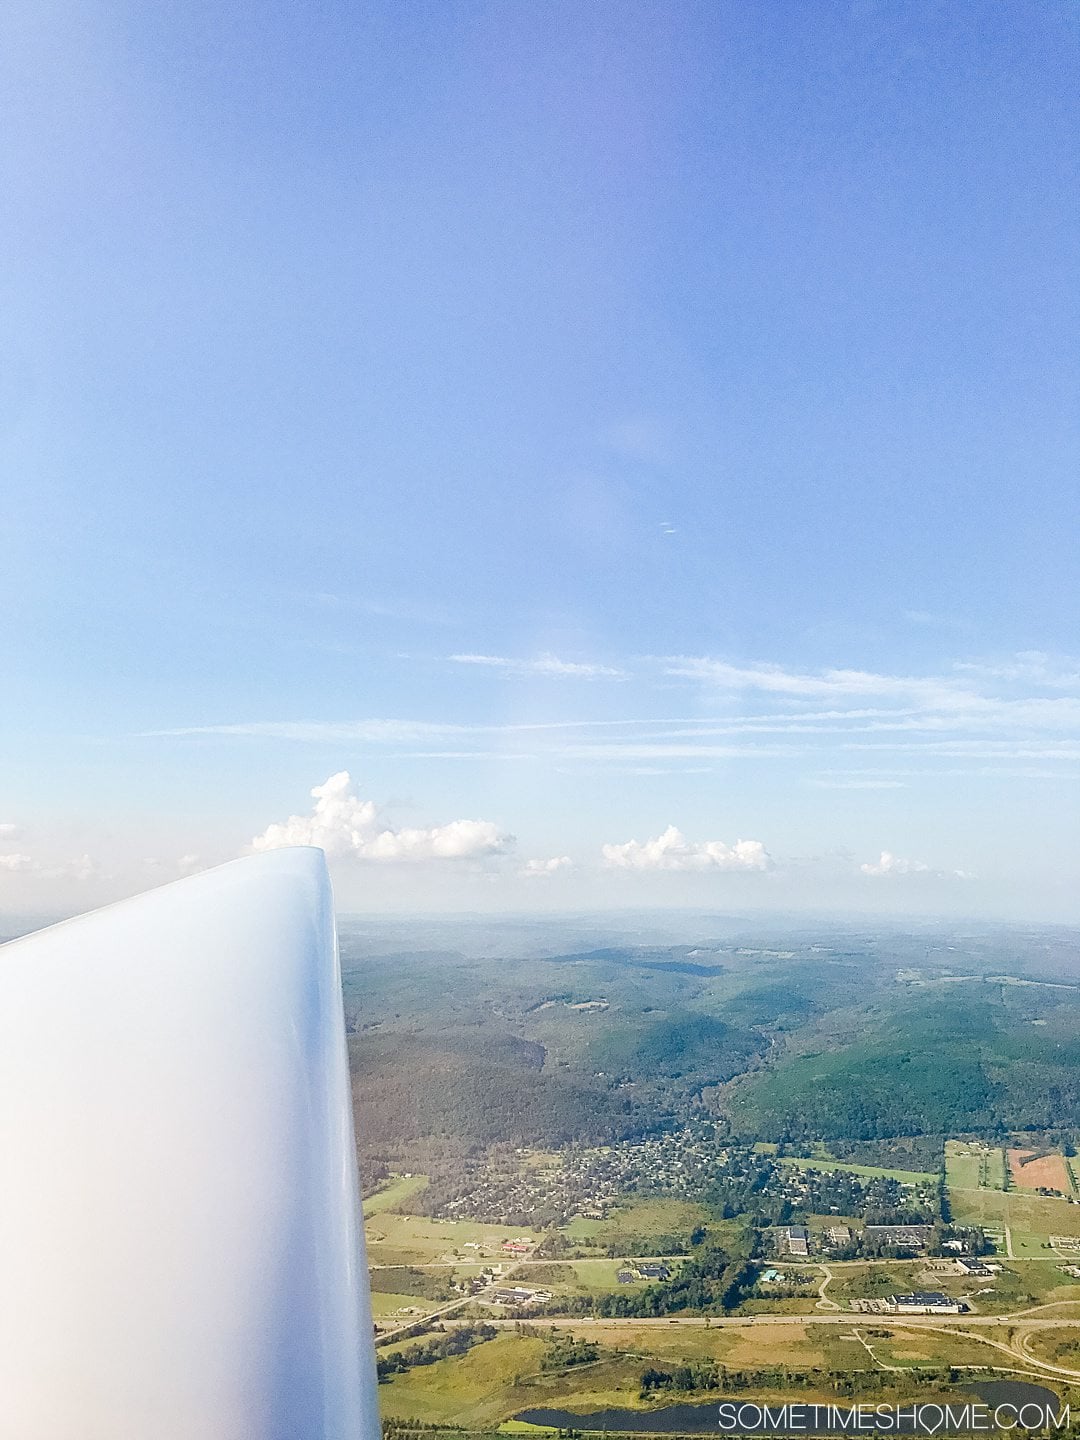 The wing of a hang glider looking out to the greenery of the Finger Lakes in NY.